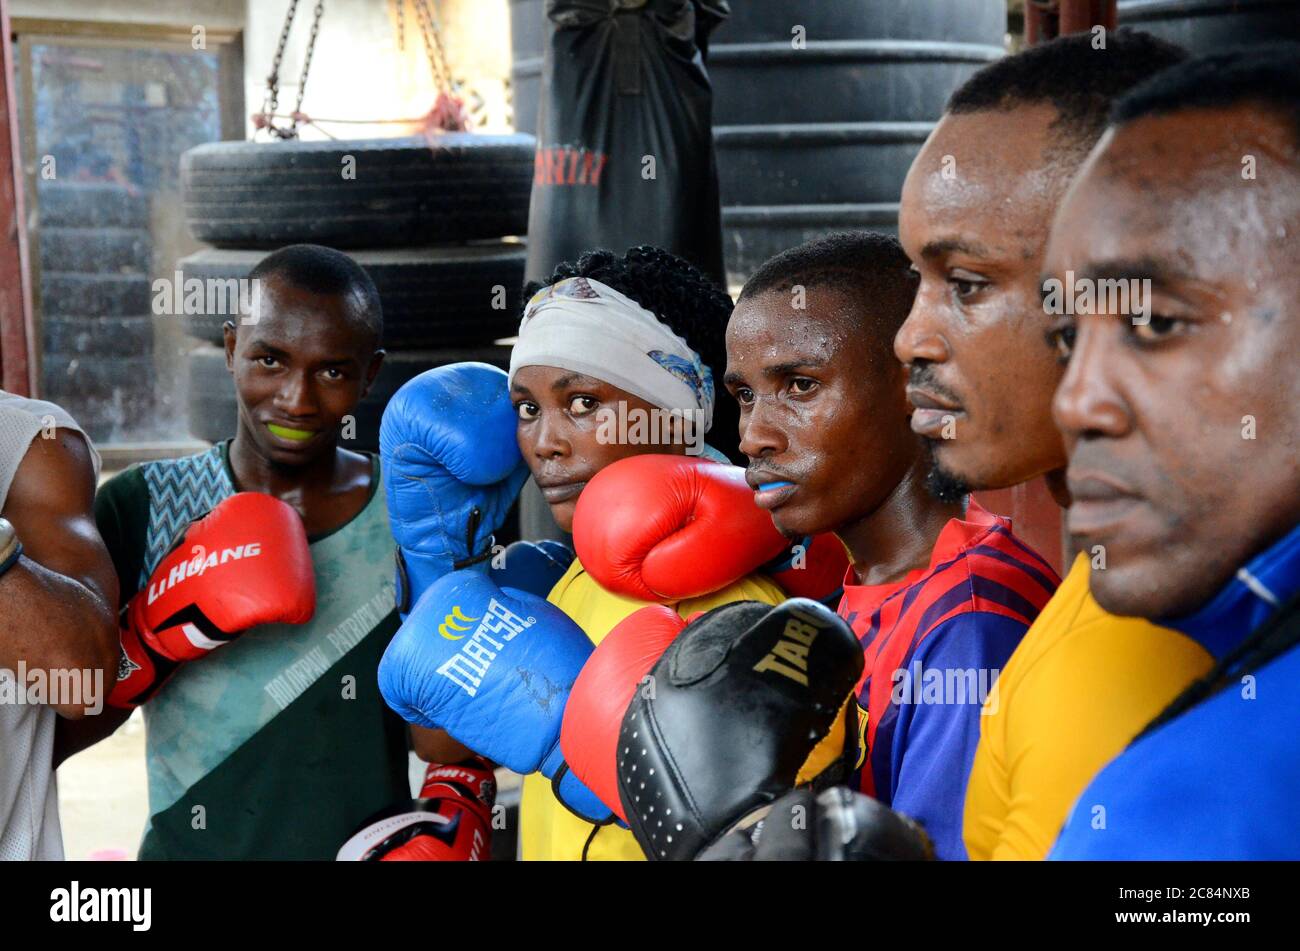 Dar Es Salaam. 21st July, 2020. Female boxer Jesca Mfinanga (4th R) poses  with her male teammates at a boxing club in Dar es Salaam, Tanzania, on  July 20, 2020. Jesca Mfinanga,